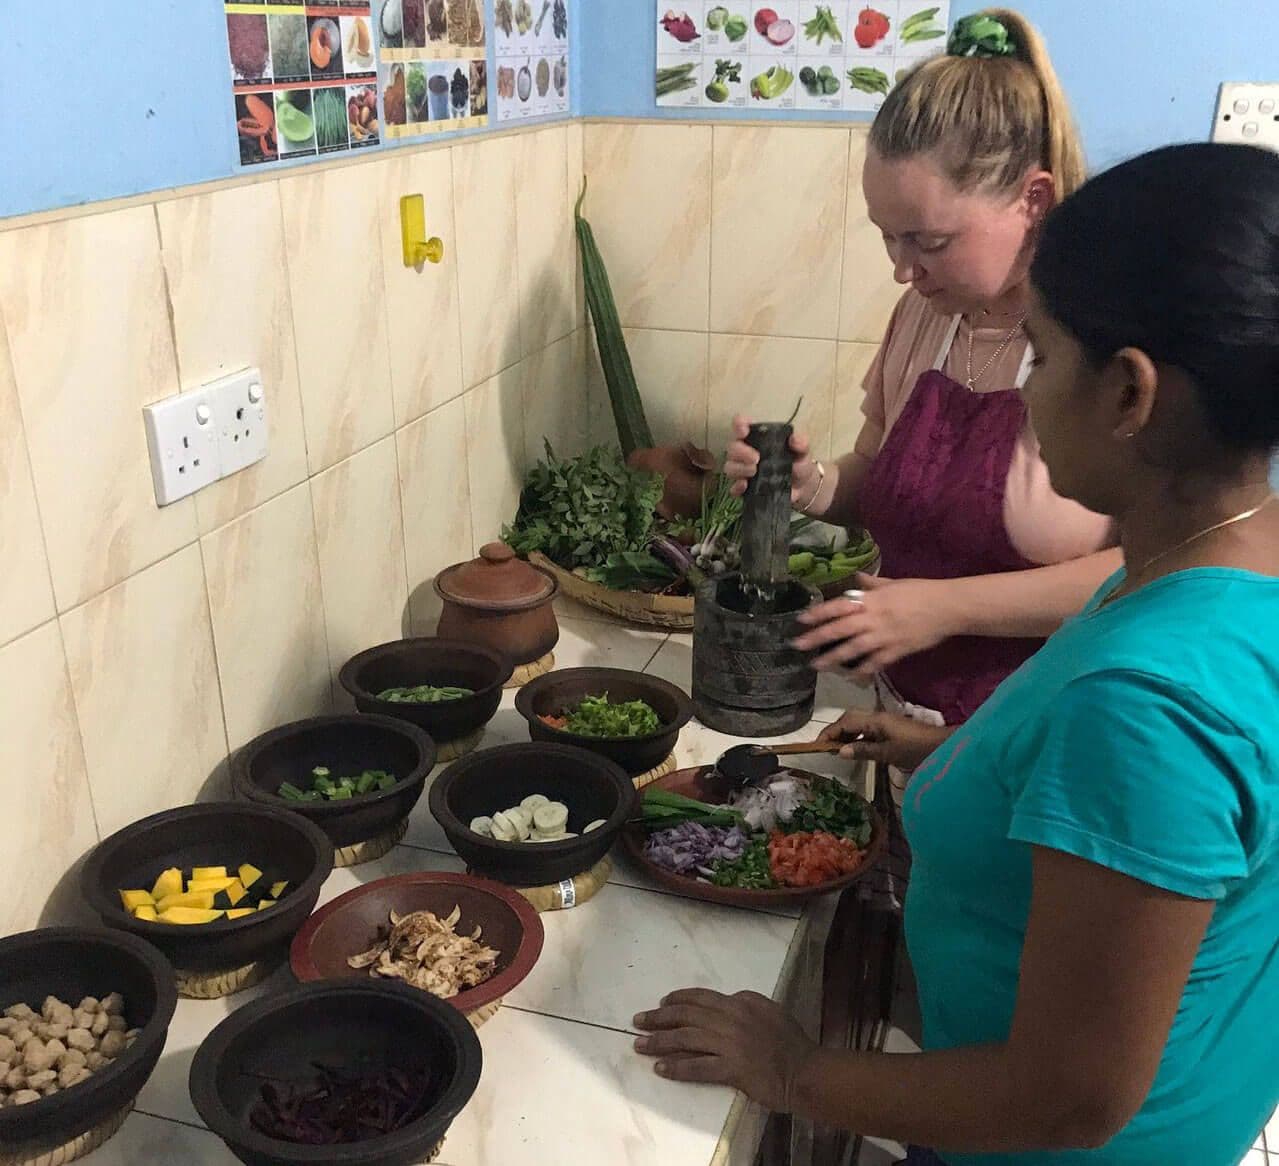 A tourist woman get Cooking experience with the guidance of Sri Lankan woman in Sri Lanka